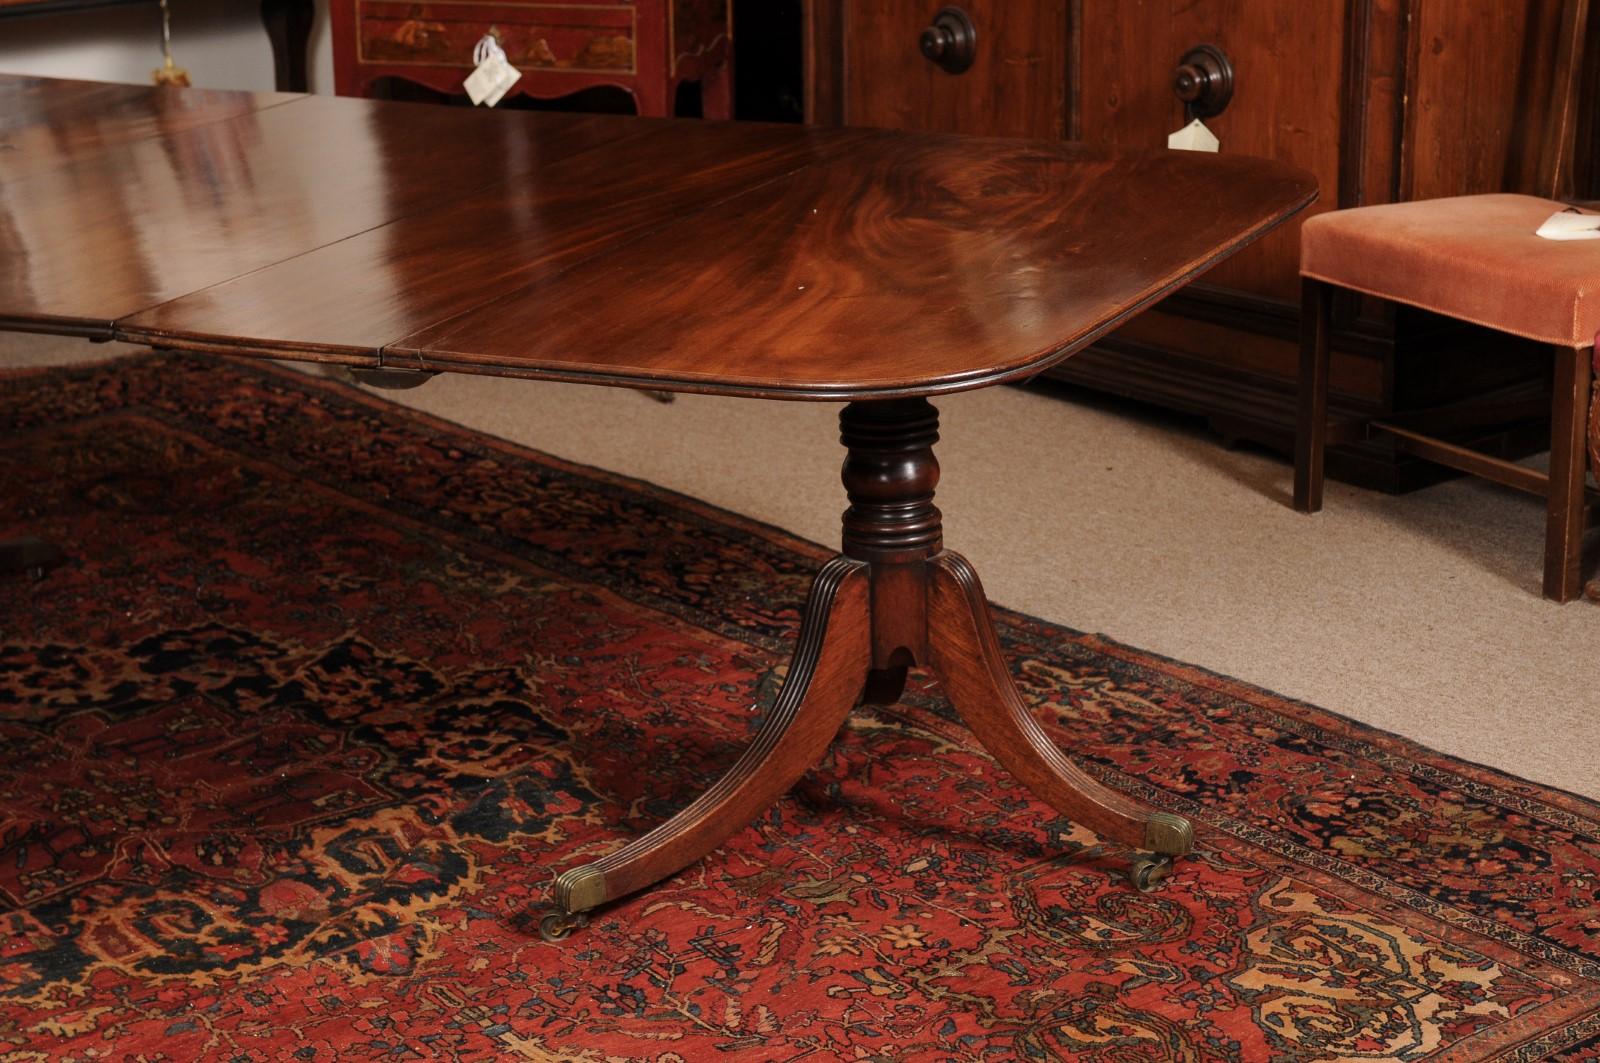 English Regency Mahogany Double Pedestal Extending Dining Table with 2 Leaves In Good Condition For Sale In Atlanta, GA